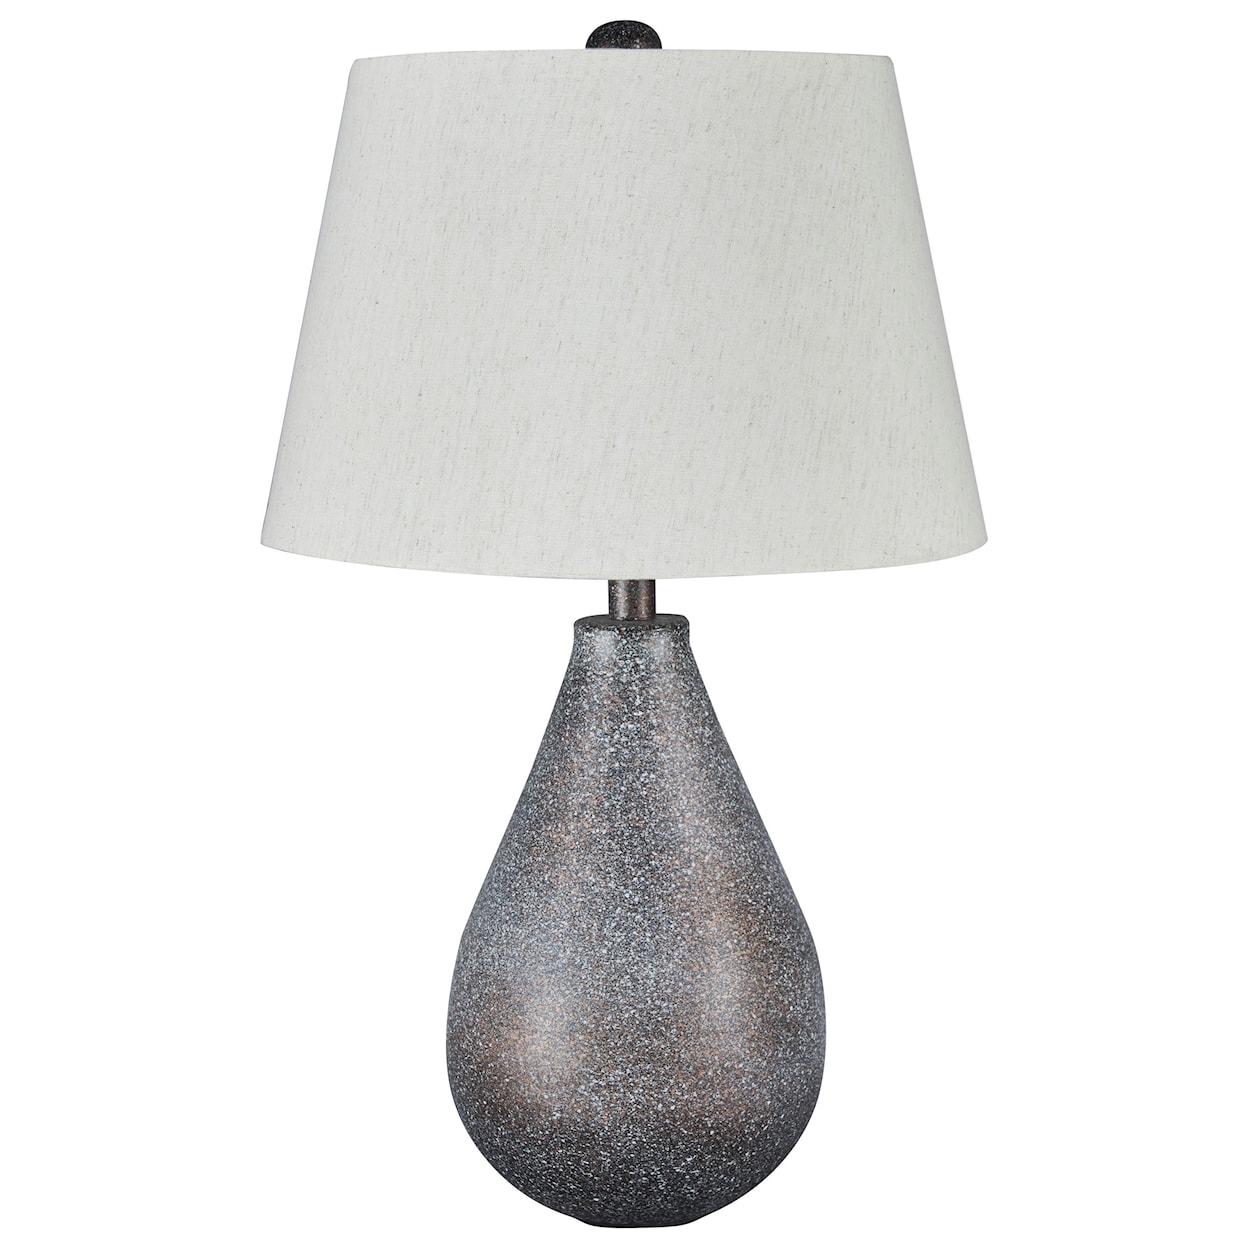 Signature Design by Ashley Lamps - Contemporary Set of 2 Bateman Patina Metal Table Lamps